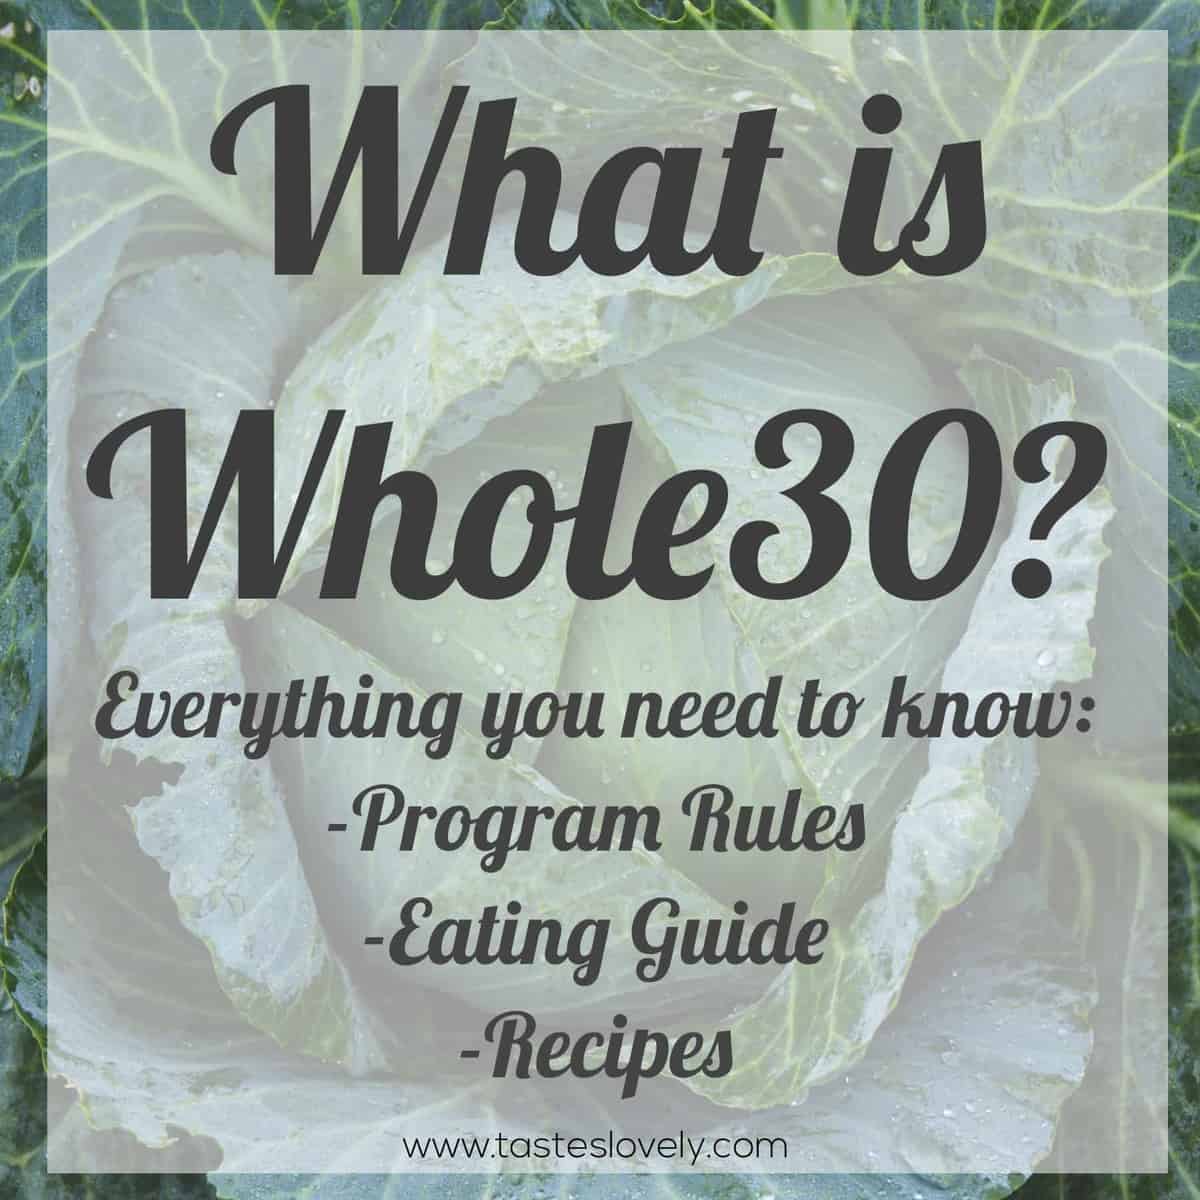 Everything You Need To Know To Be Successful On The Whole30 Plan